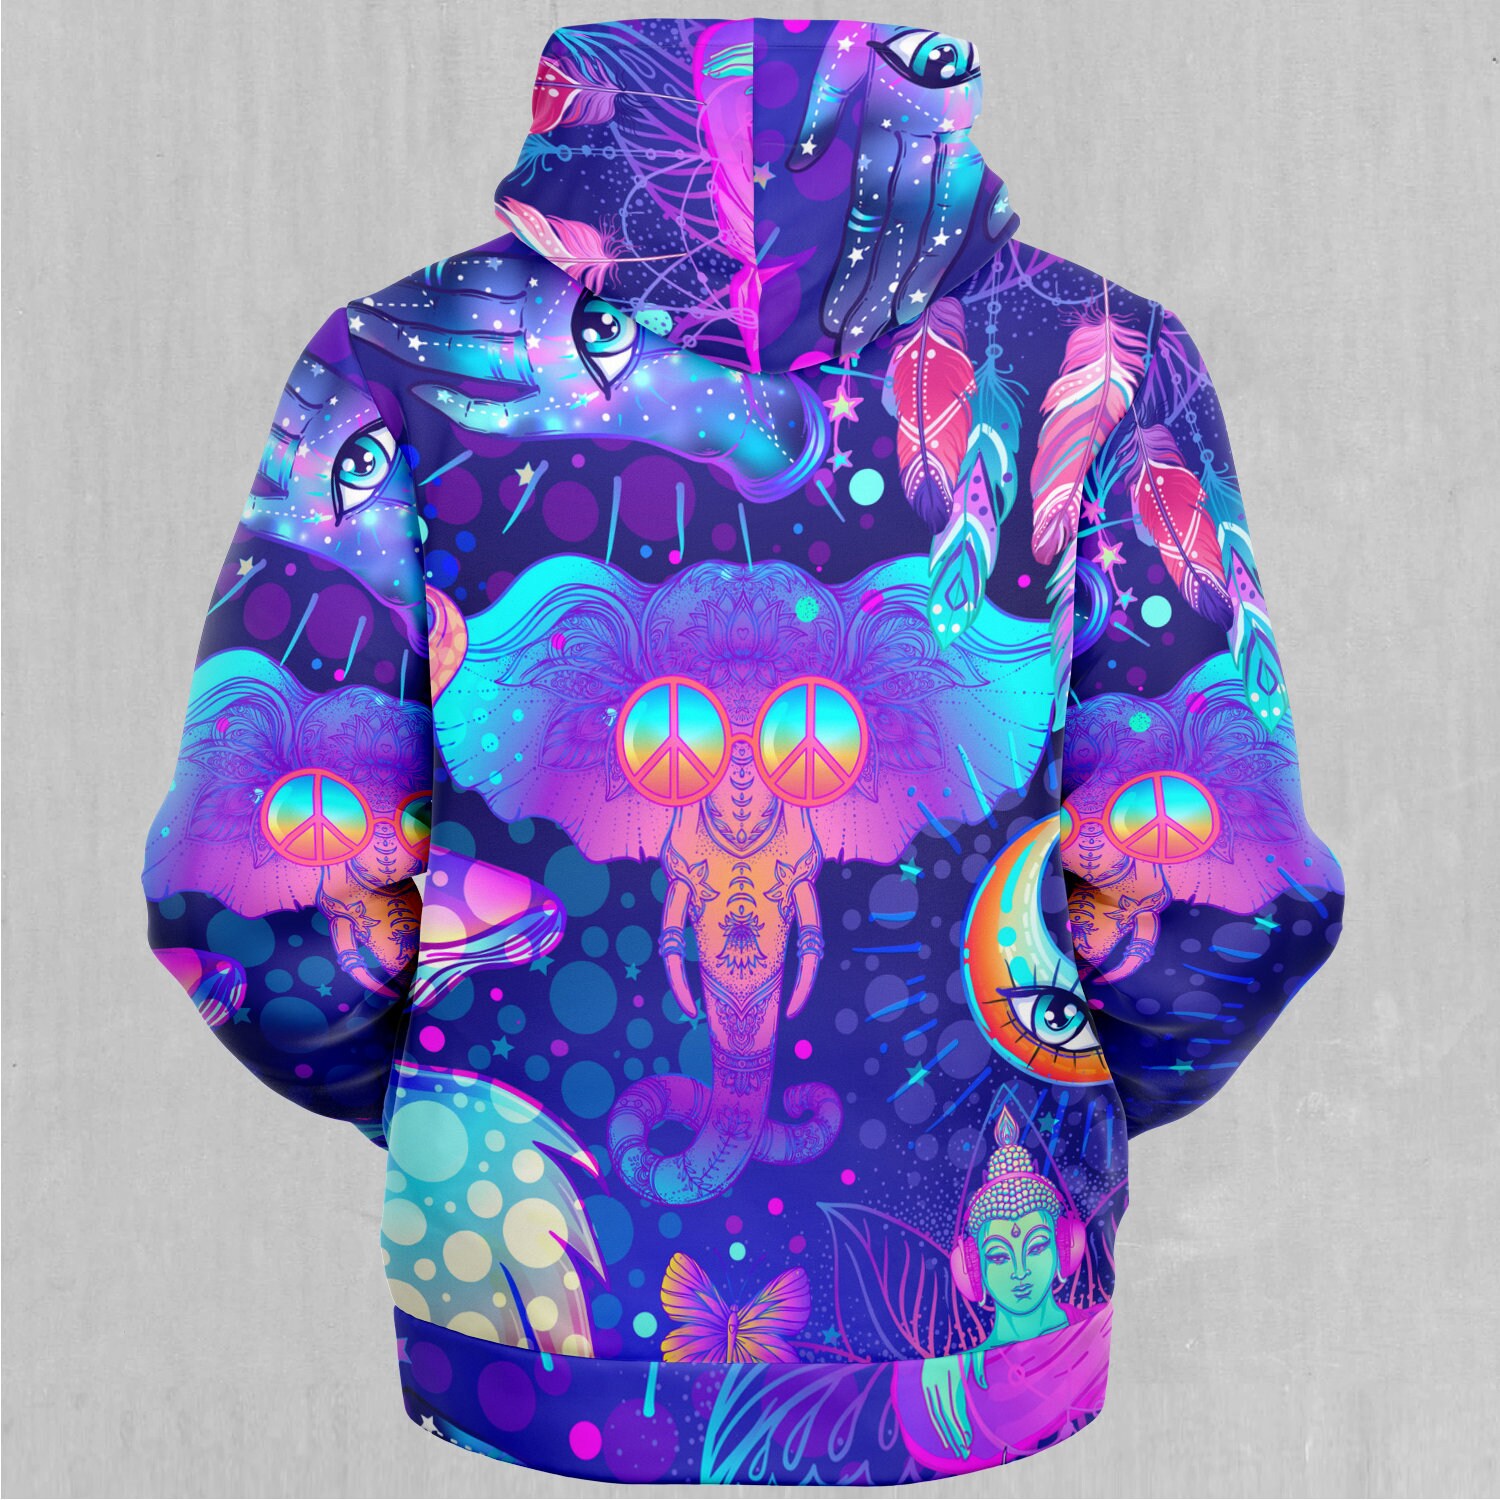 Discover Psycho Luminescence Abstract Trippy Sherpa Microfleece Zip-Up Hoodie